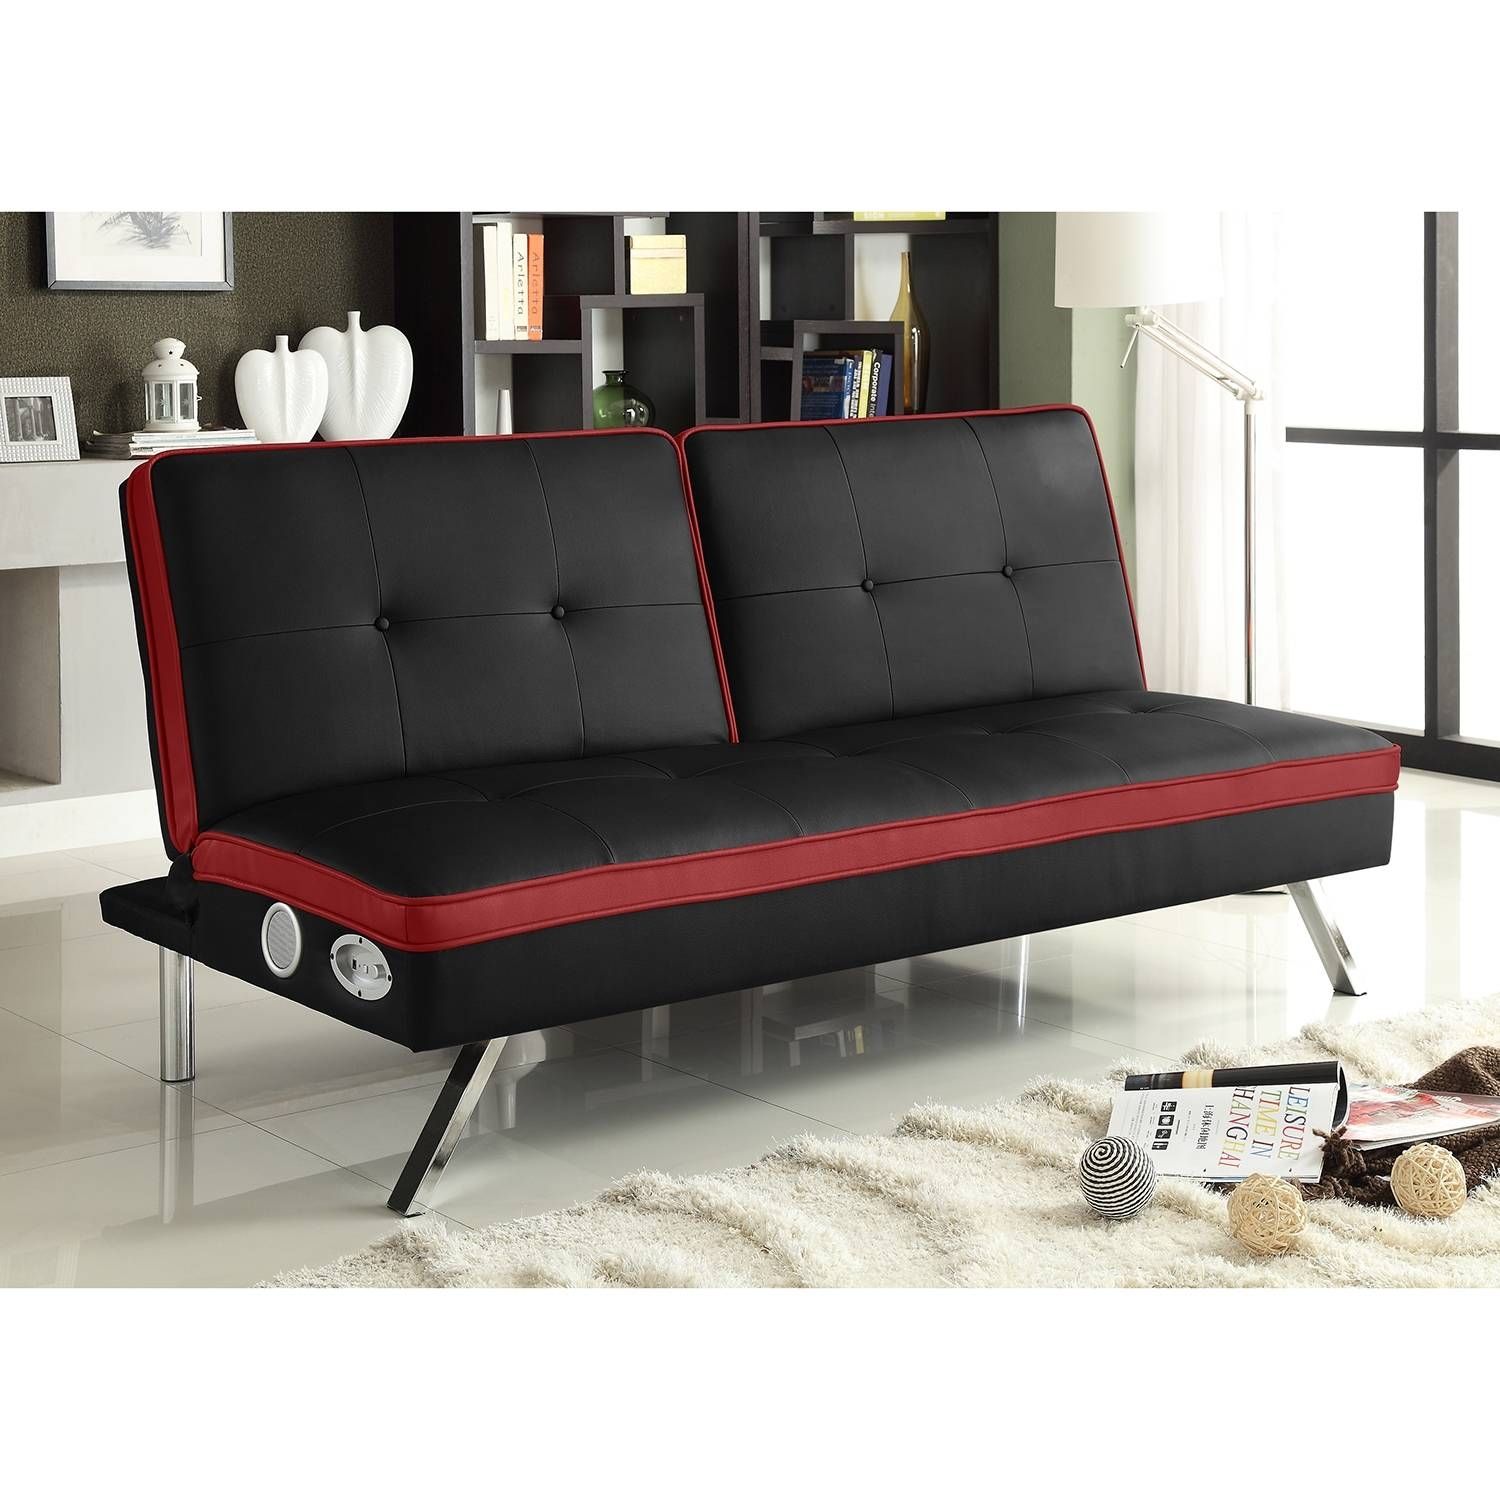 Furniture: Add An Inviting Comfortable Feel To Your Living Room With Regard To Kmart Futon Beds (View 6 of 15)